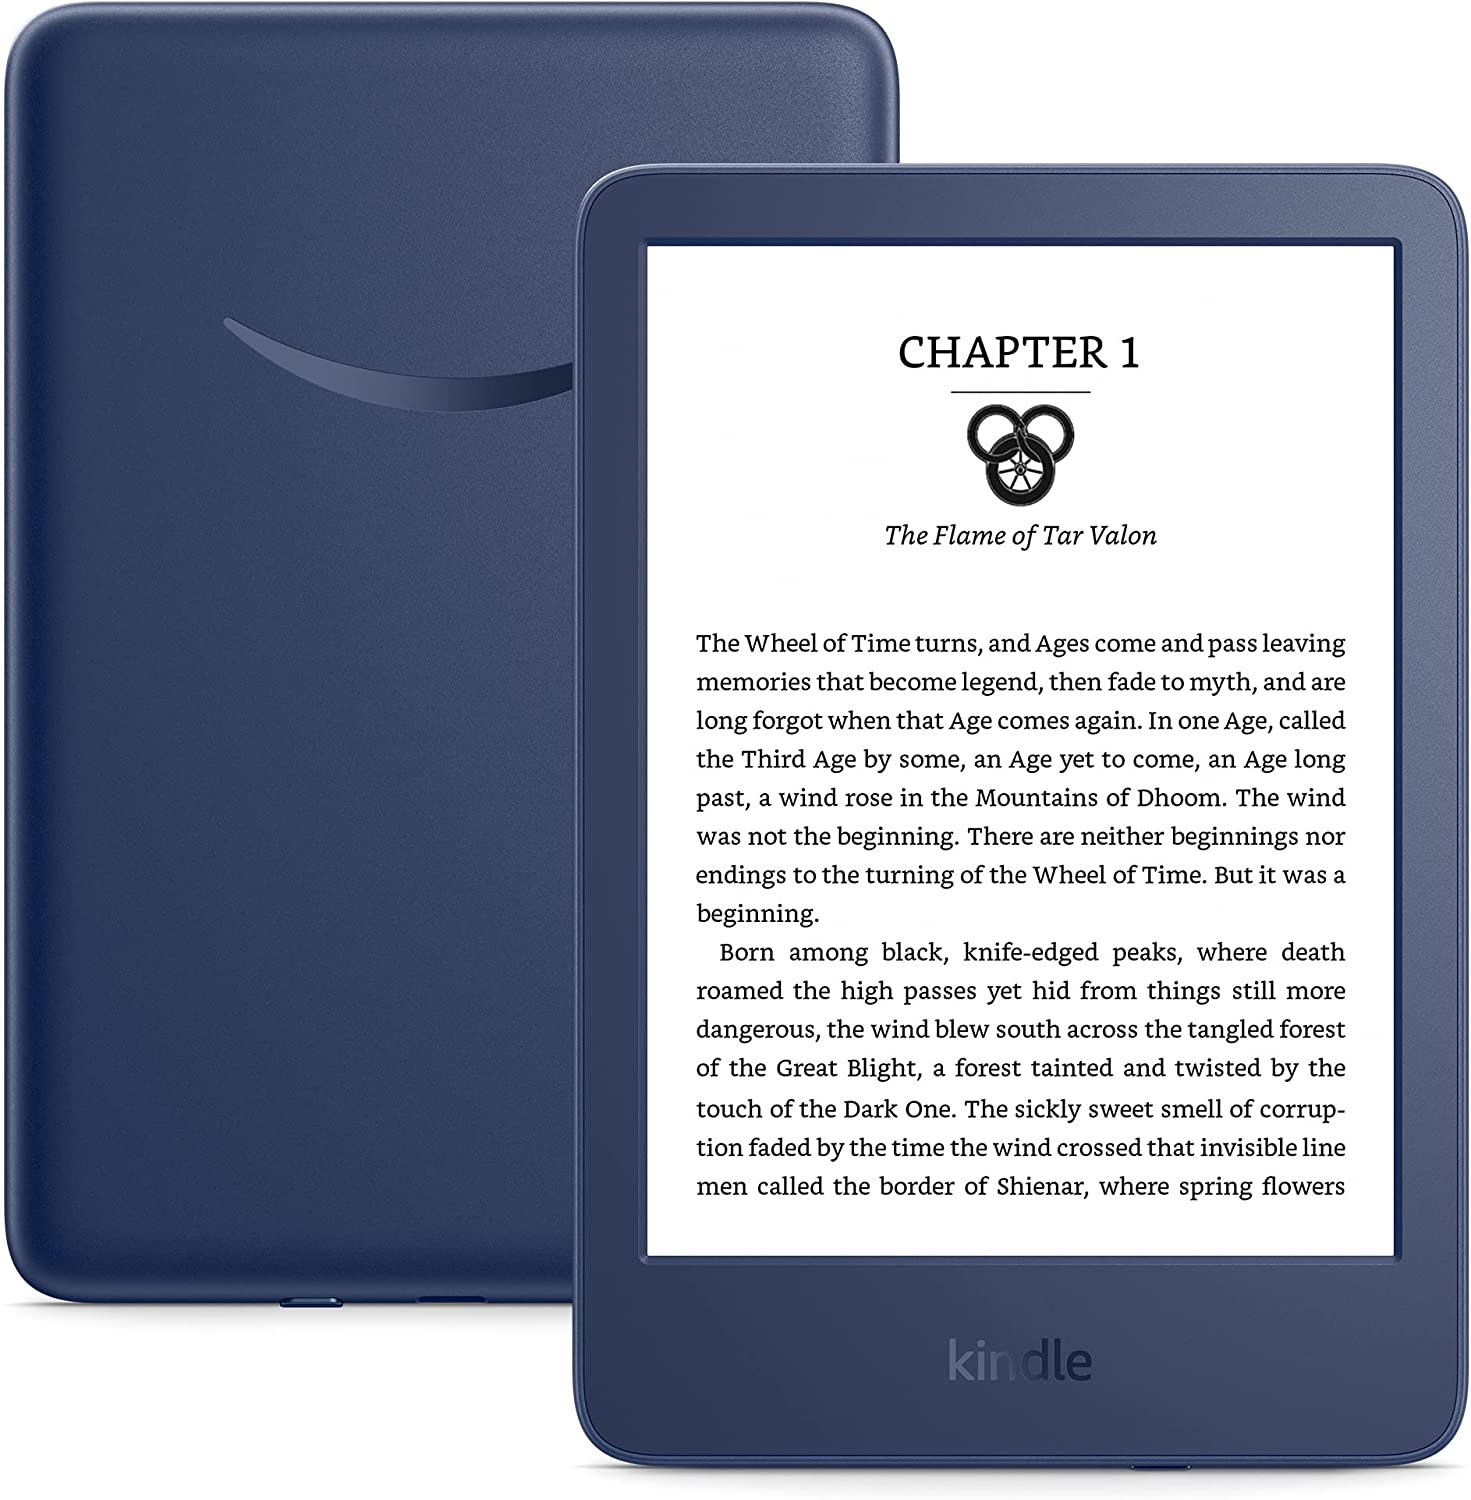 New Kindle Review – 11th Gen (2022 Model)